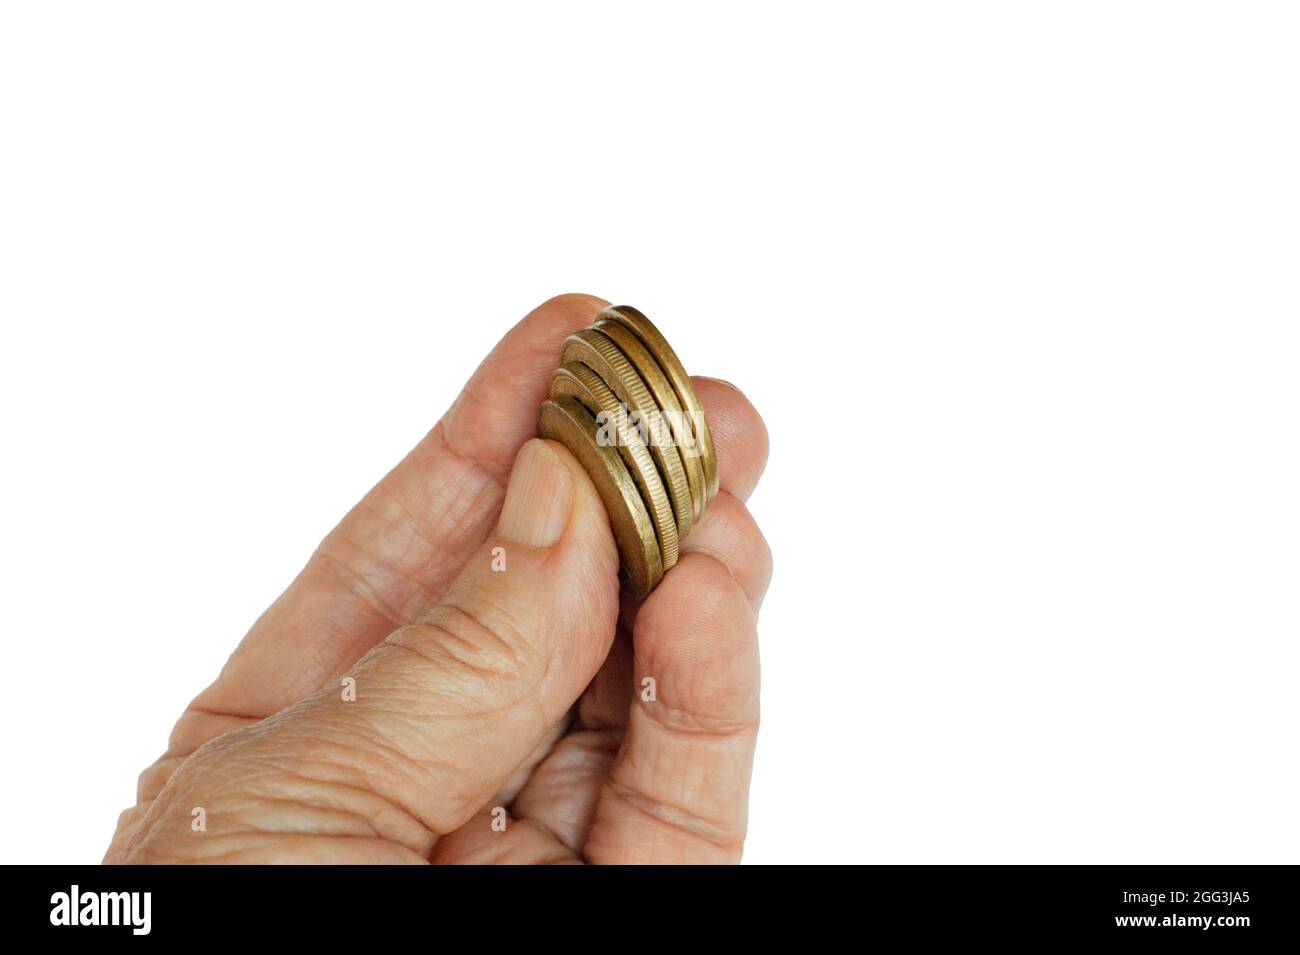 Gold coins held up by fingers or mature hand. Isolated. A group of five gold coins is lifted up to show, to give, to invest. Stock Photo